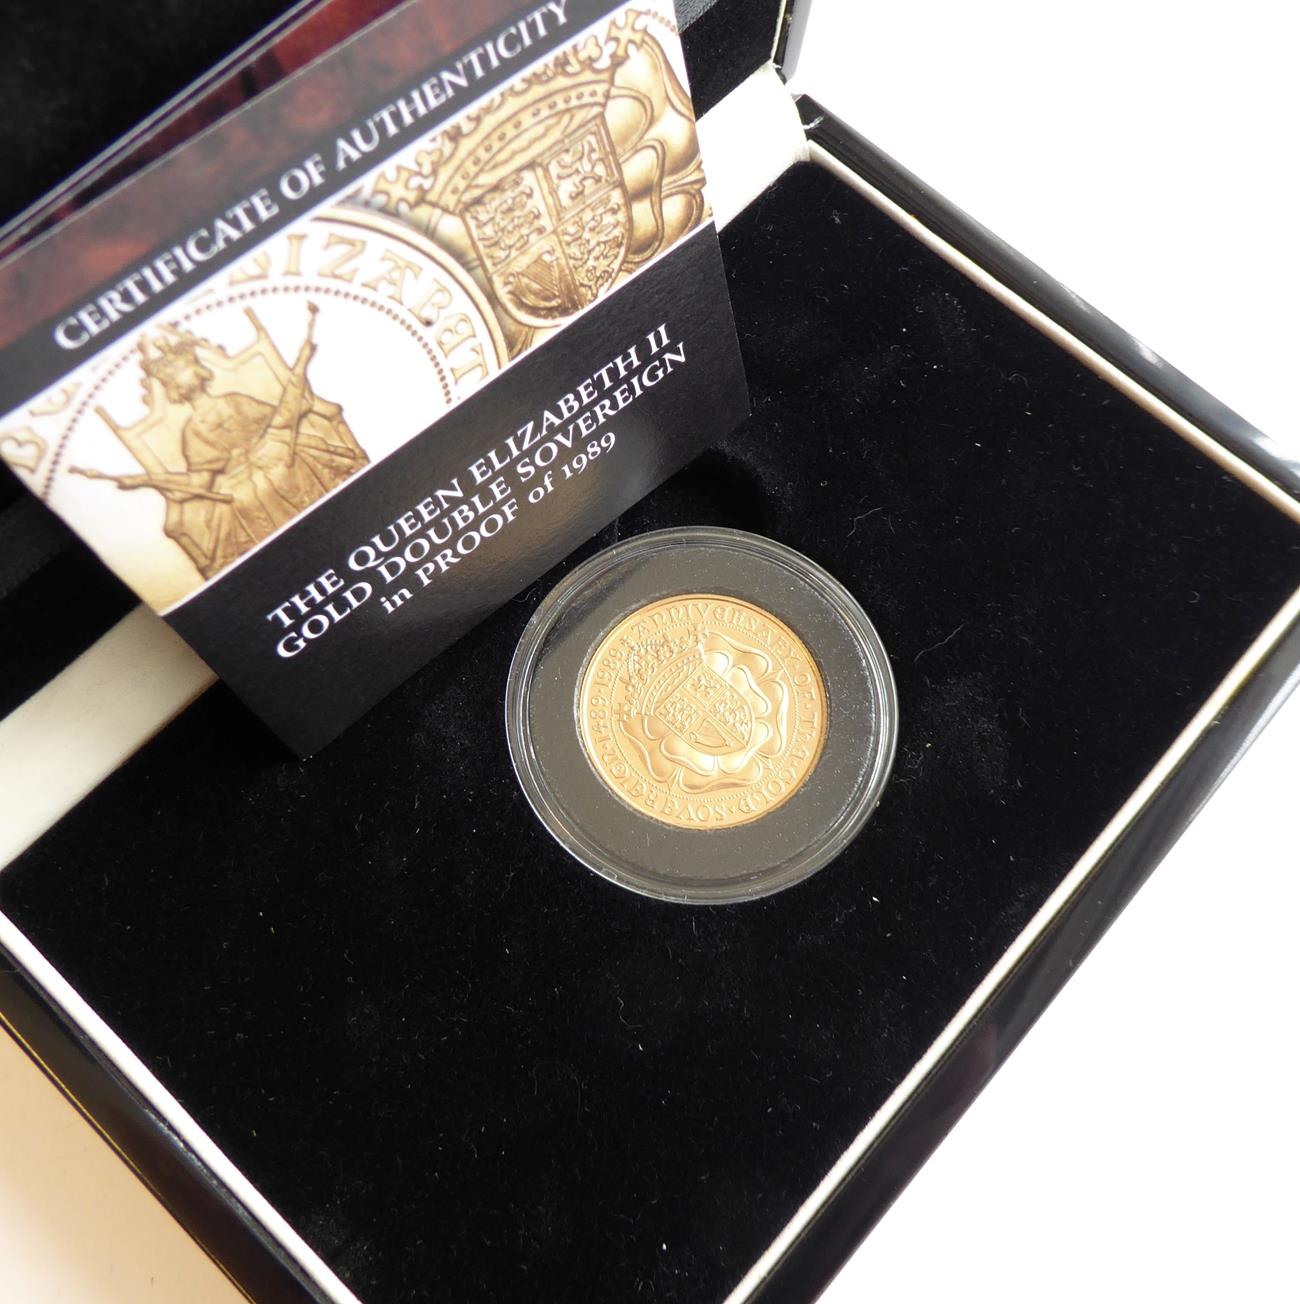 Lot 2093 - Royal Mint Issue Proof 1989 Gold £2 Double Sovereign Presented in London Mint Office Box with...